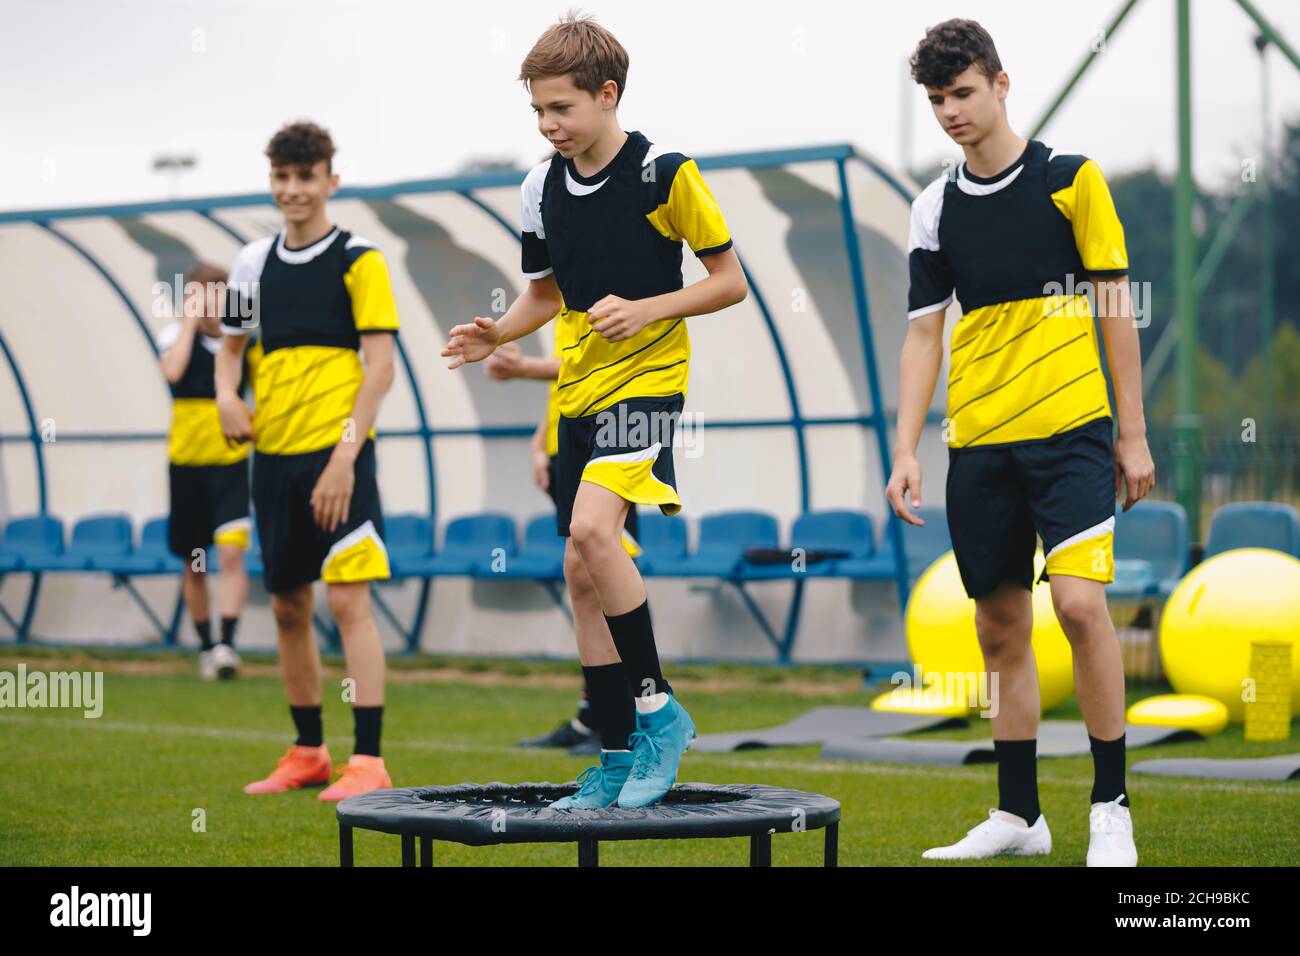 Soccer training trampoline. Group of young boys in sports football club practicing on jumping trampoline. Youth athletes improving stability skills Stock Photo